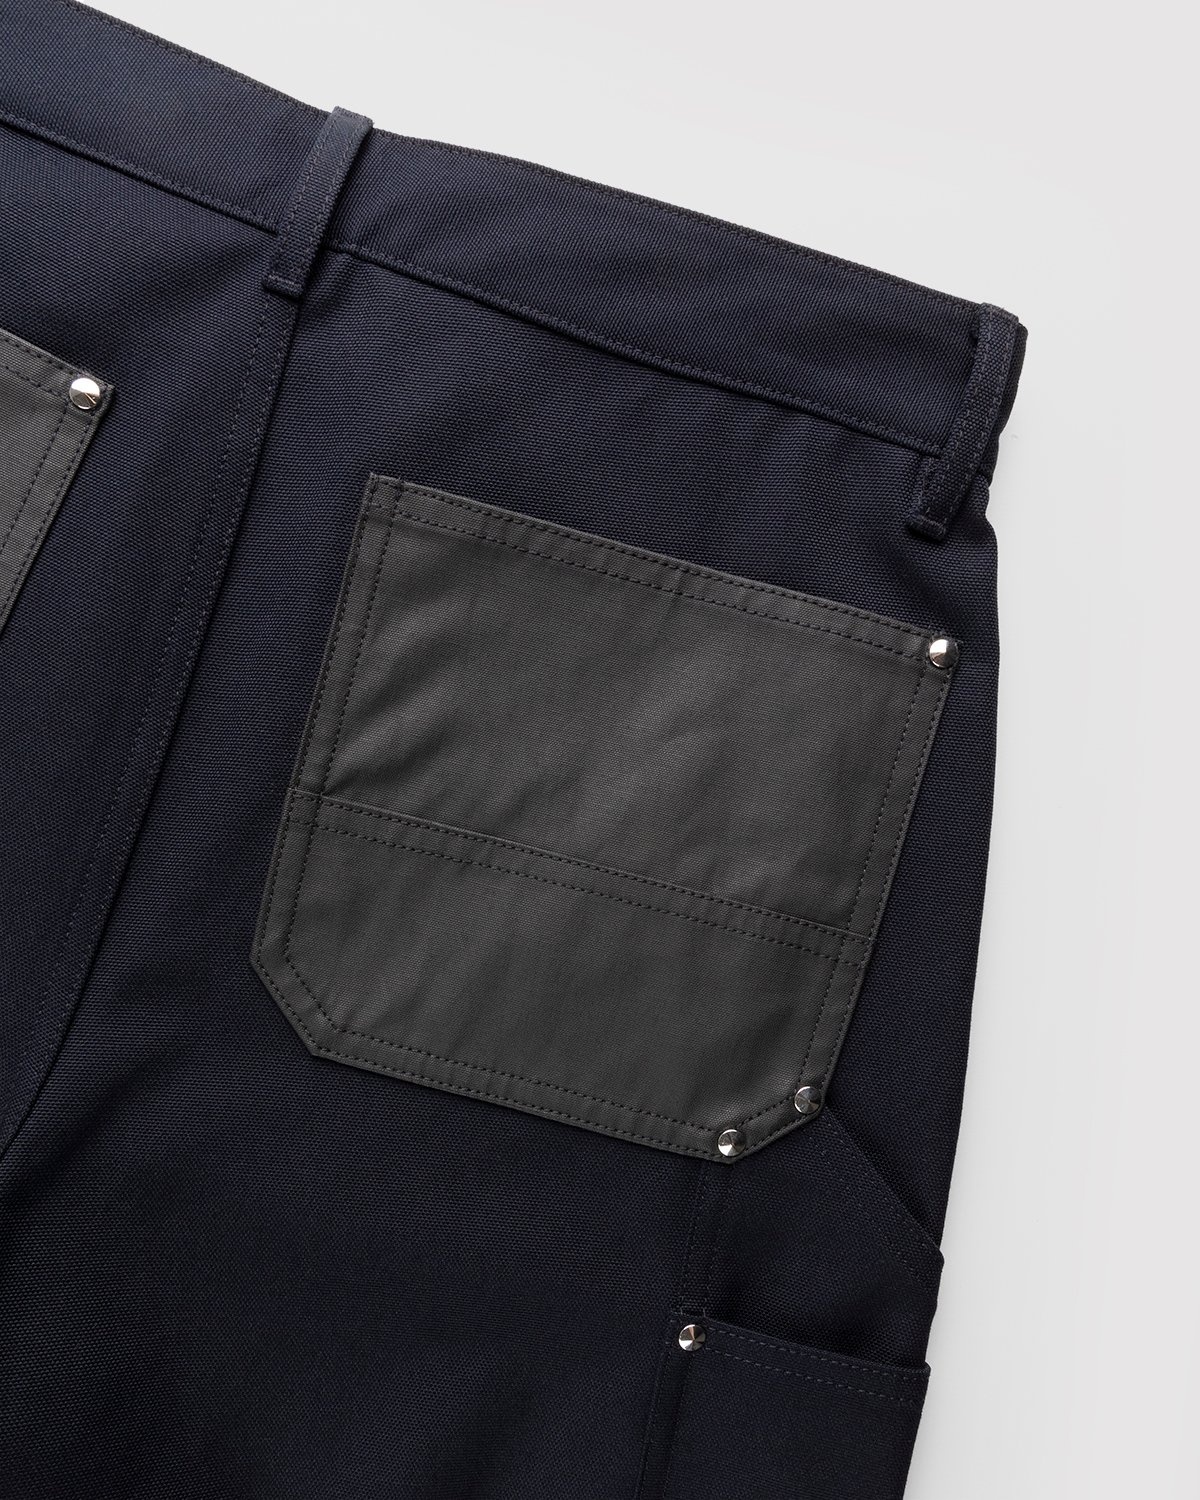 BOSS x Phipps – Water-Repellent Trousers Black - Trousers - Black - Image 4